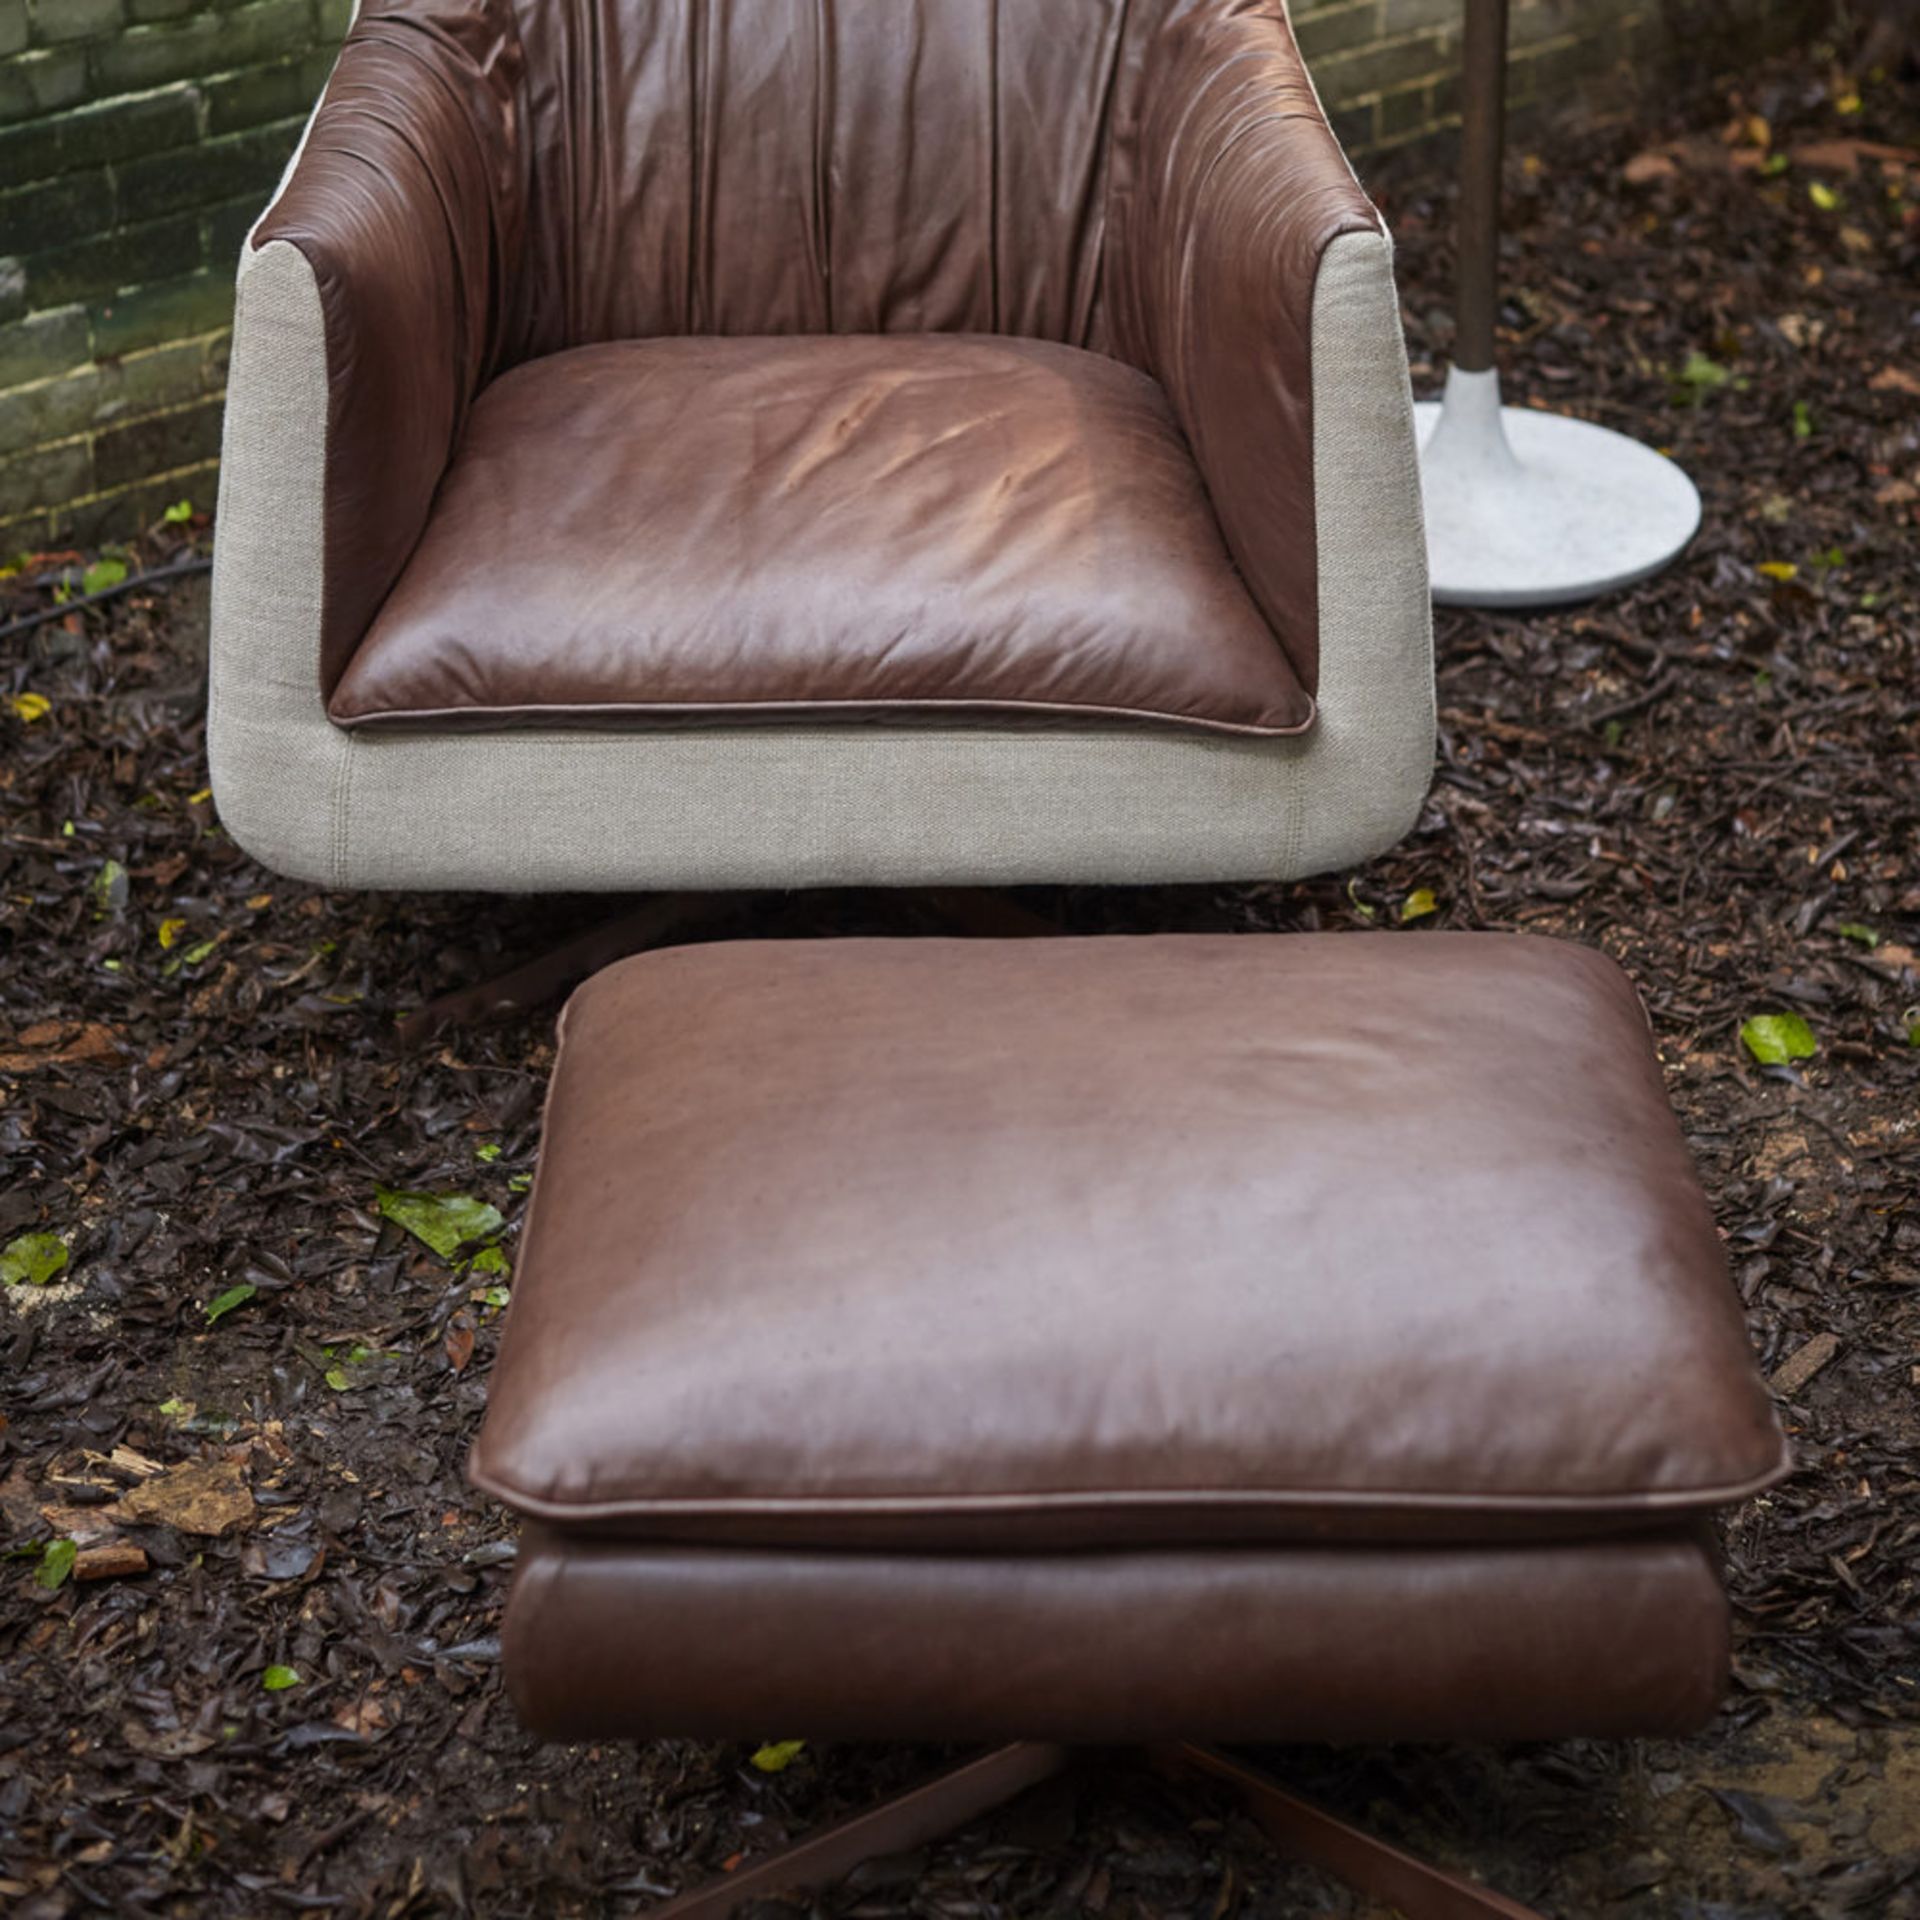 Bleu Nature Waki Footstool – F318 Iroquois Chocolate And Brushed Copper 64 x 55 x 42 cm RRP £1195